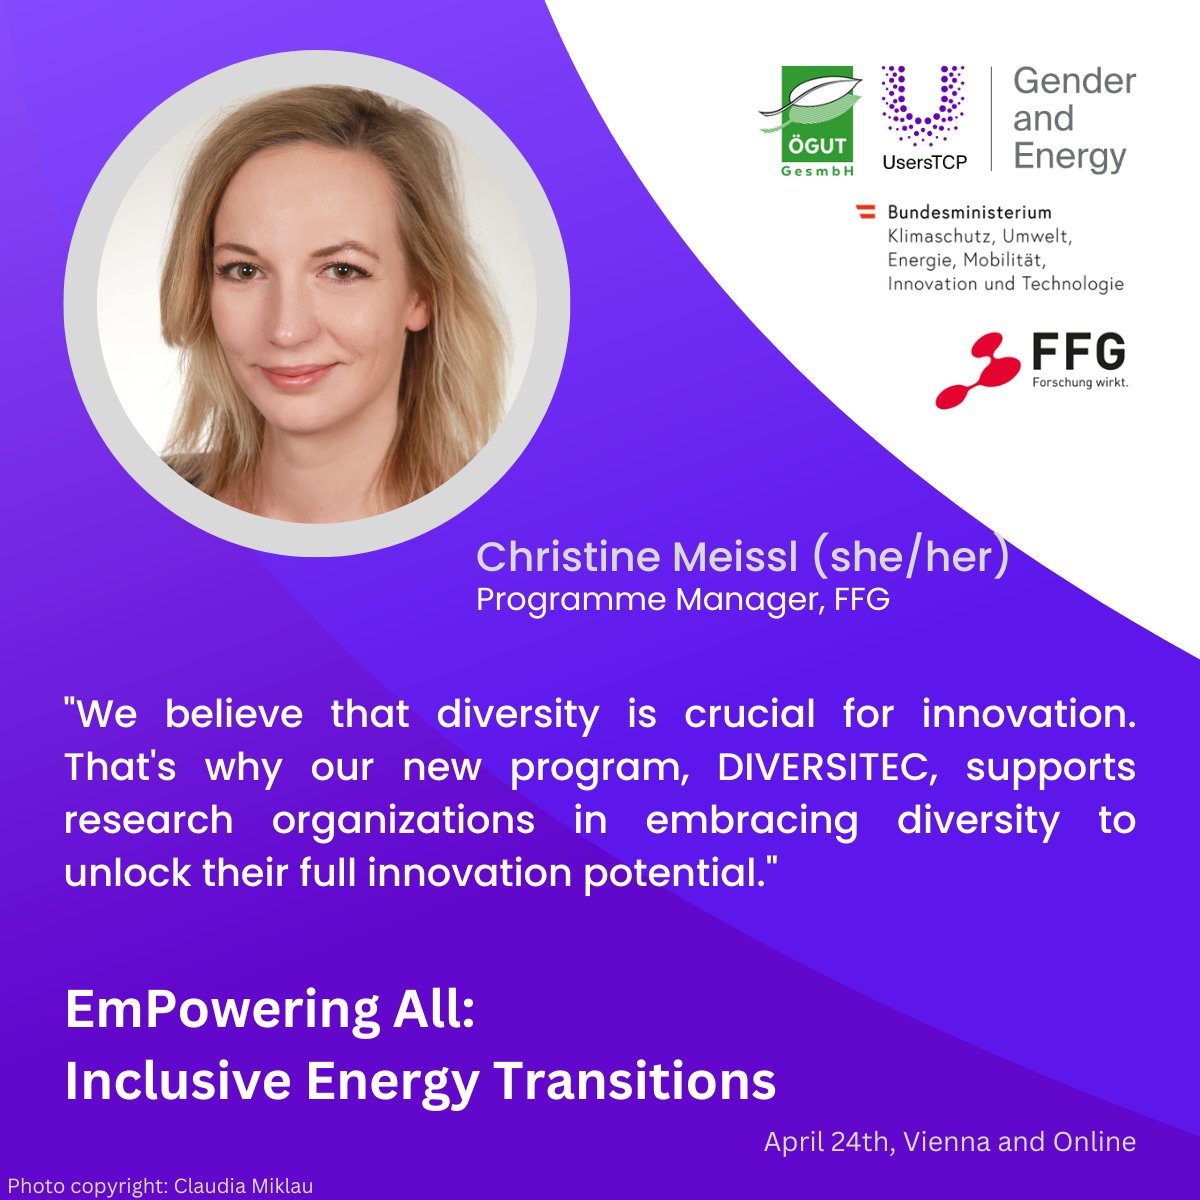 Christine Meissl is joining us as a speaker sharing insights into FFG's funding opportunities in Austria, with a special focus on the brand-new #DIVERSITEC initiative. #EmPoweringAll #Inclusive
🗓️ April 24, 2024, 09:30 – 17:30 (CEST) /hybrid 
Register at: surveymonkey.com/r/PJBDZQJ